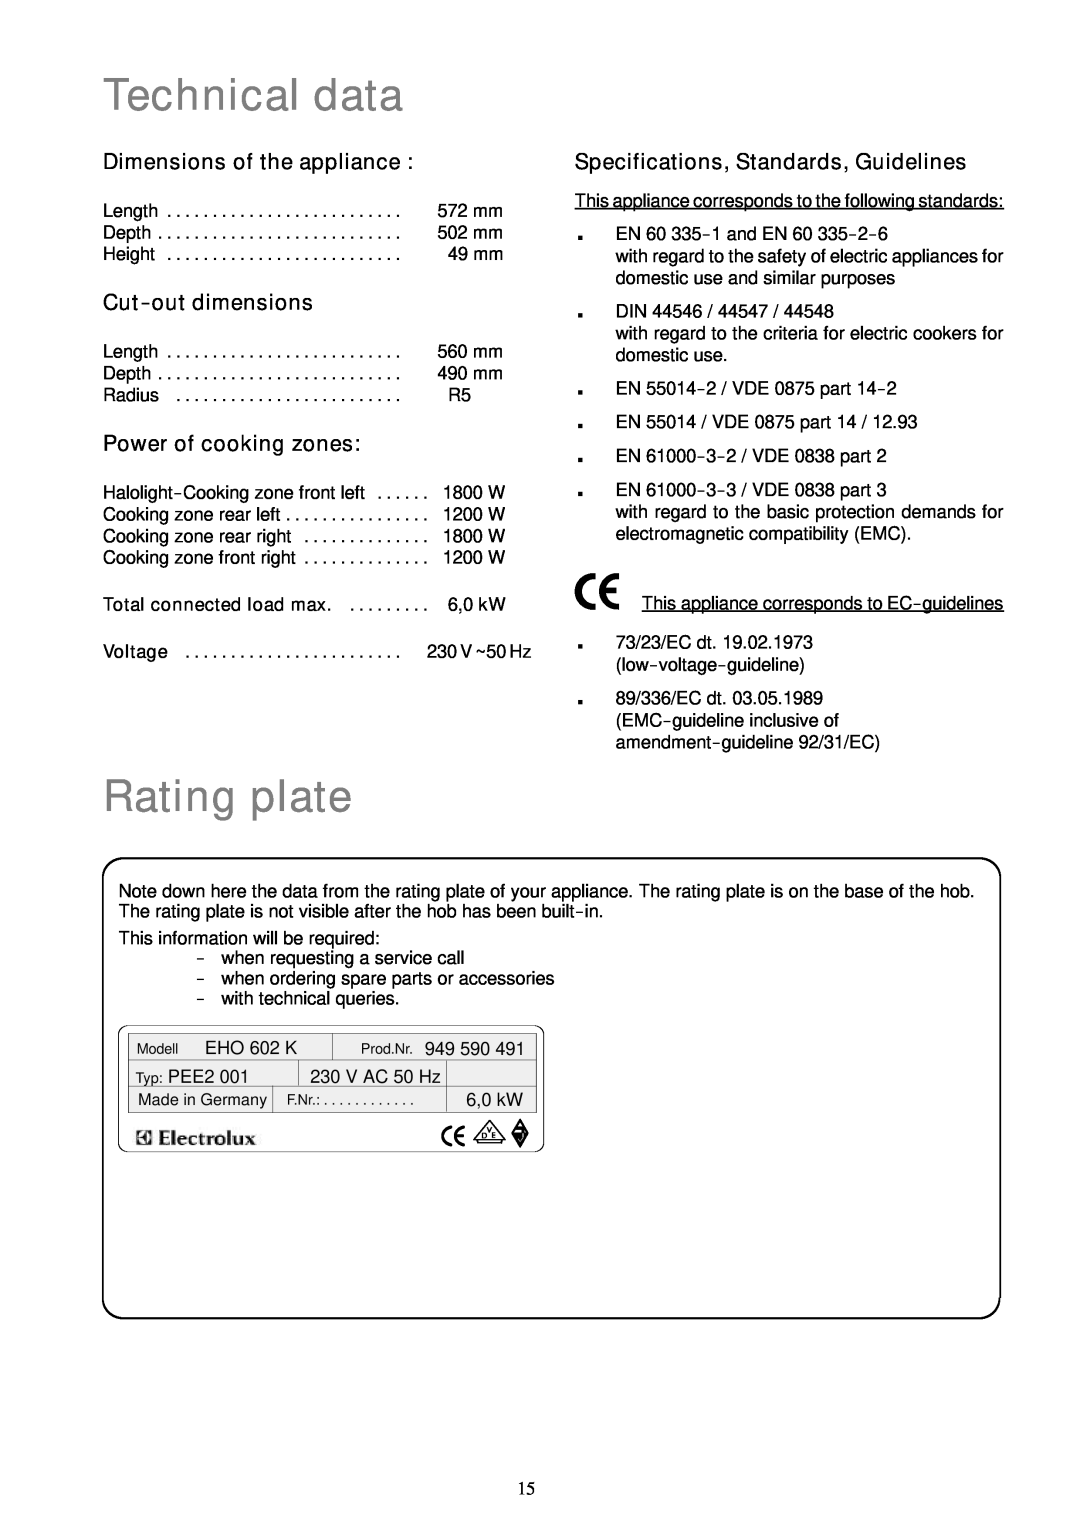 Electrolux EHO 602 K Technical data, Rating plate, Dimensions of the appliance, Cut-out dimensions, Power of cooking zones 